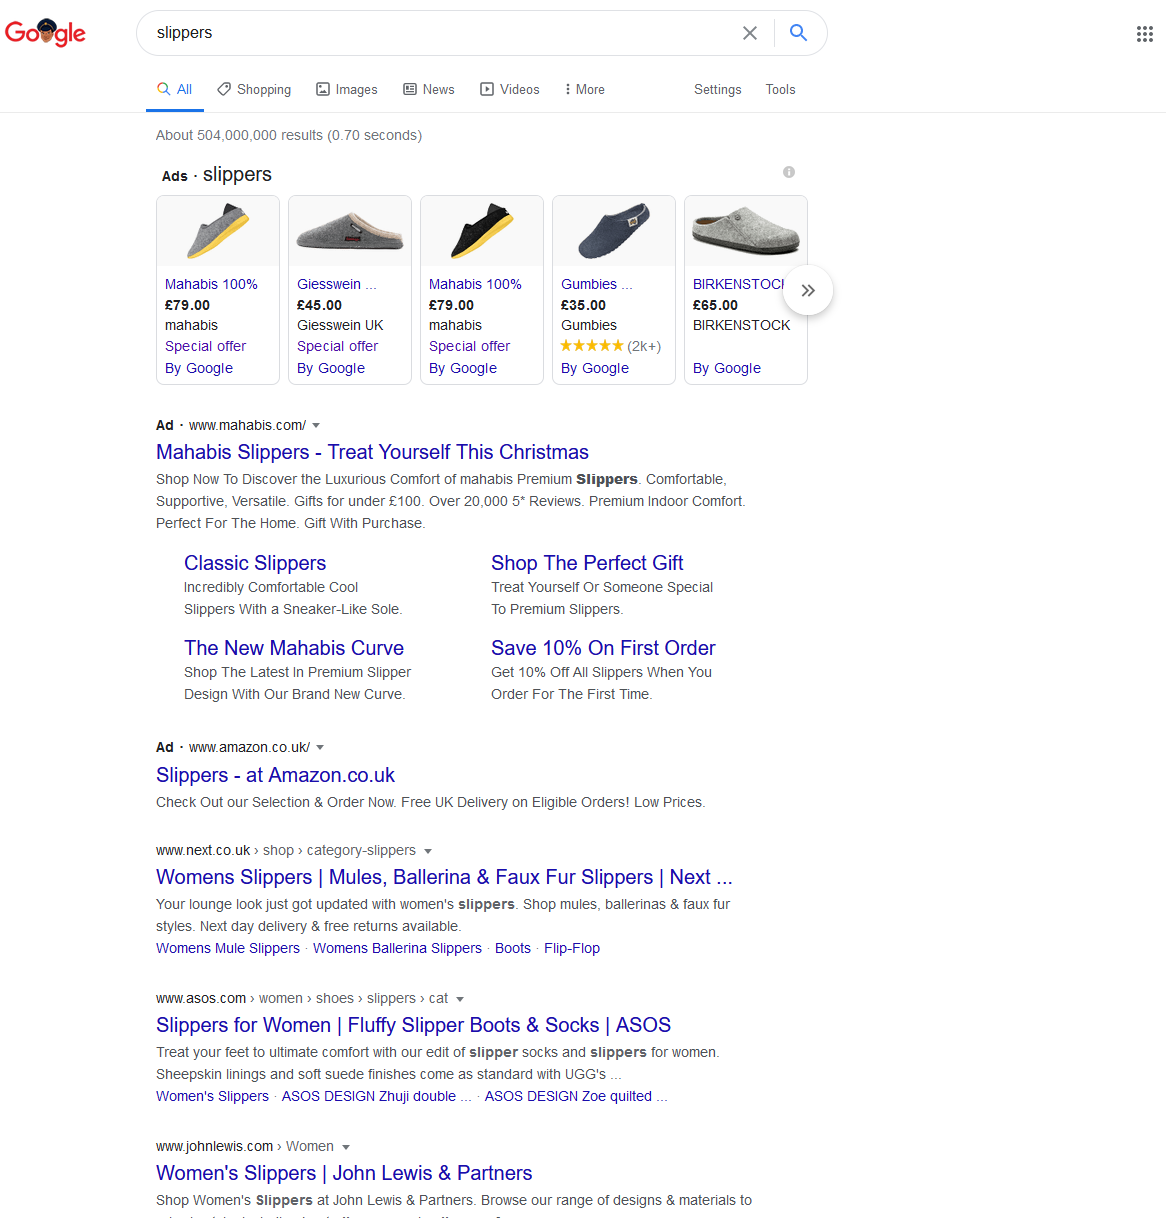 Slippers search results in Google